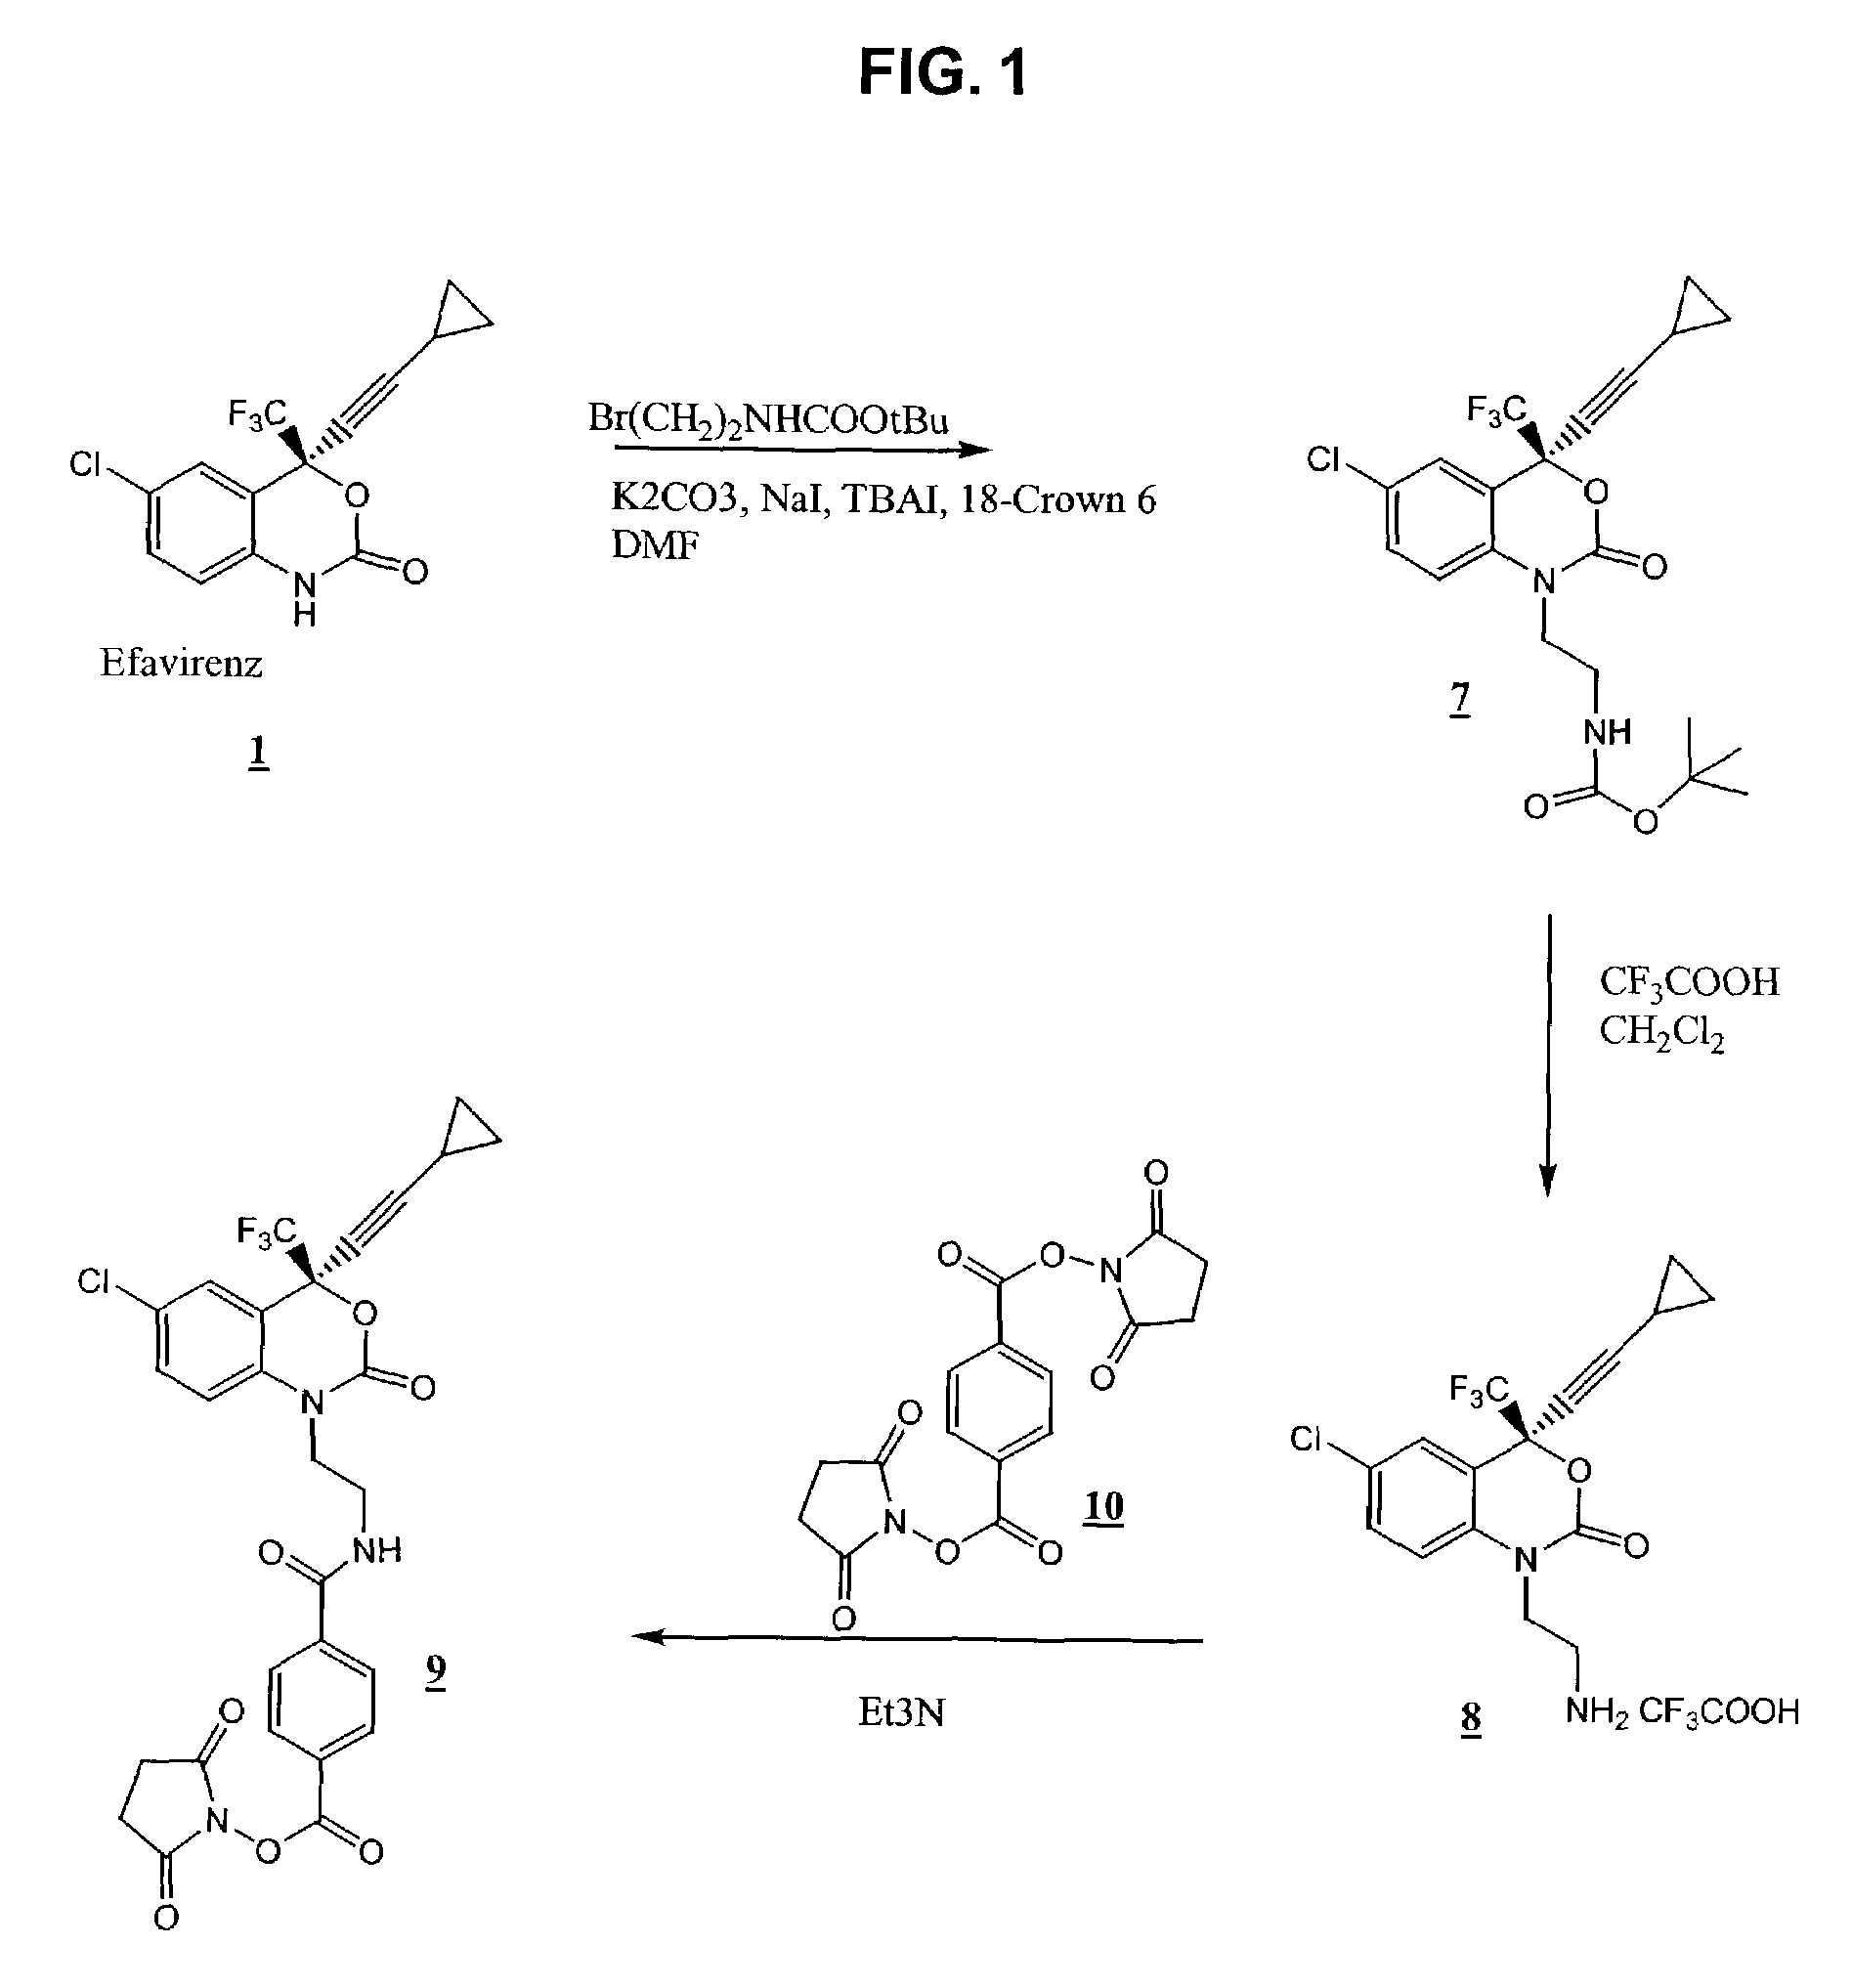 Reagents for detecting efavirenz